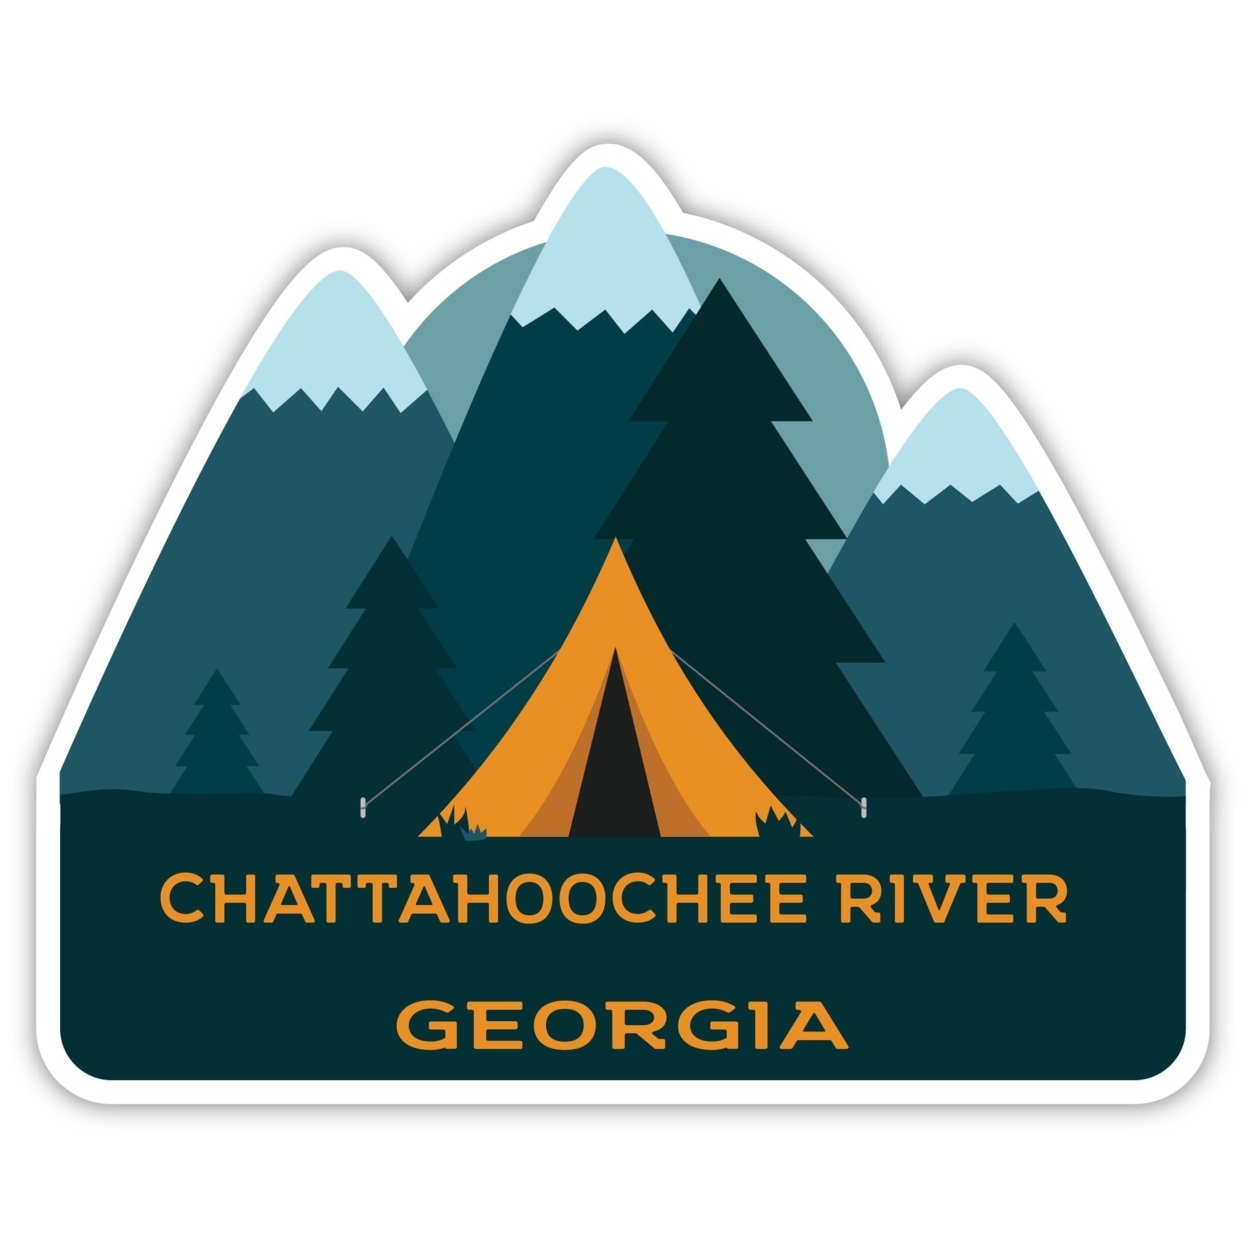 Chattahoochee River Georgia Souvenir Decorative Stickers (Choose Theme And Size) - 4-Pack, 6-Inch, Tent